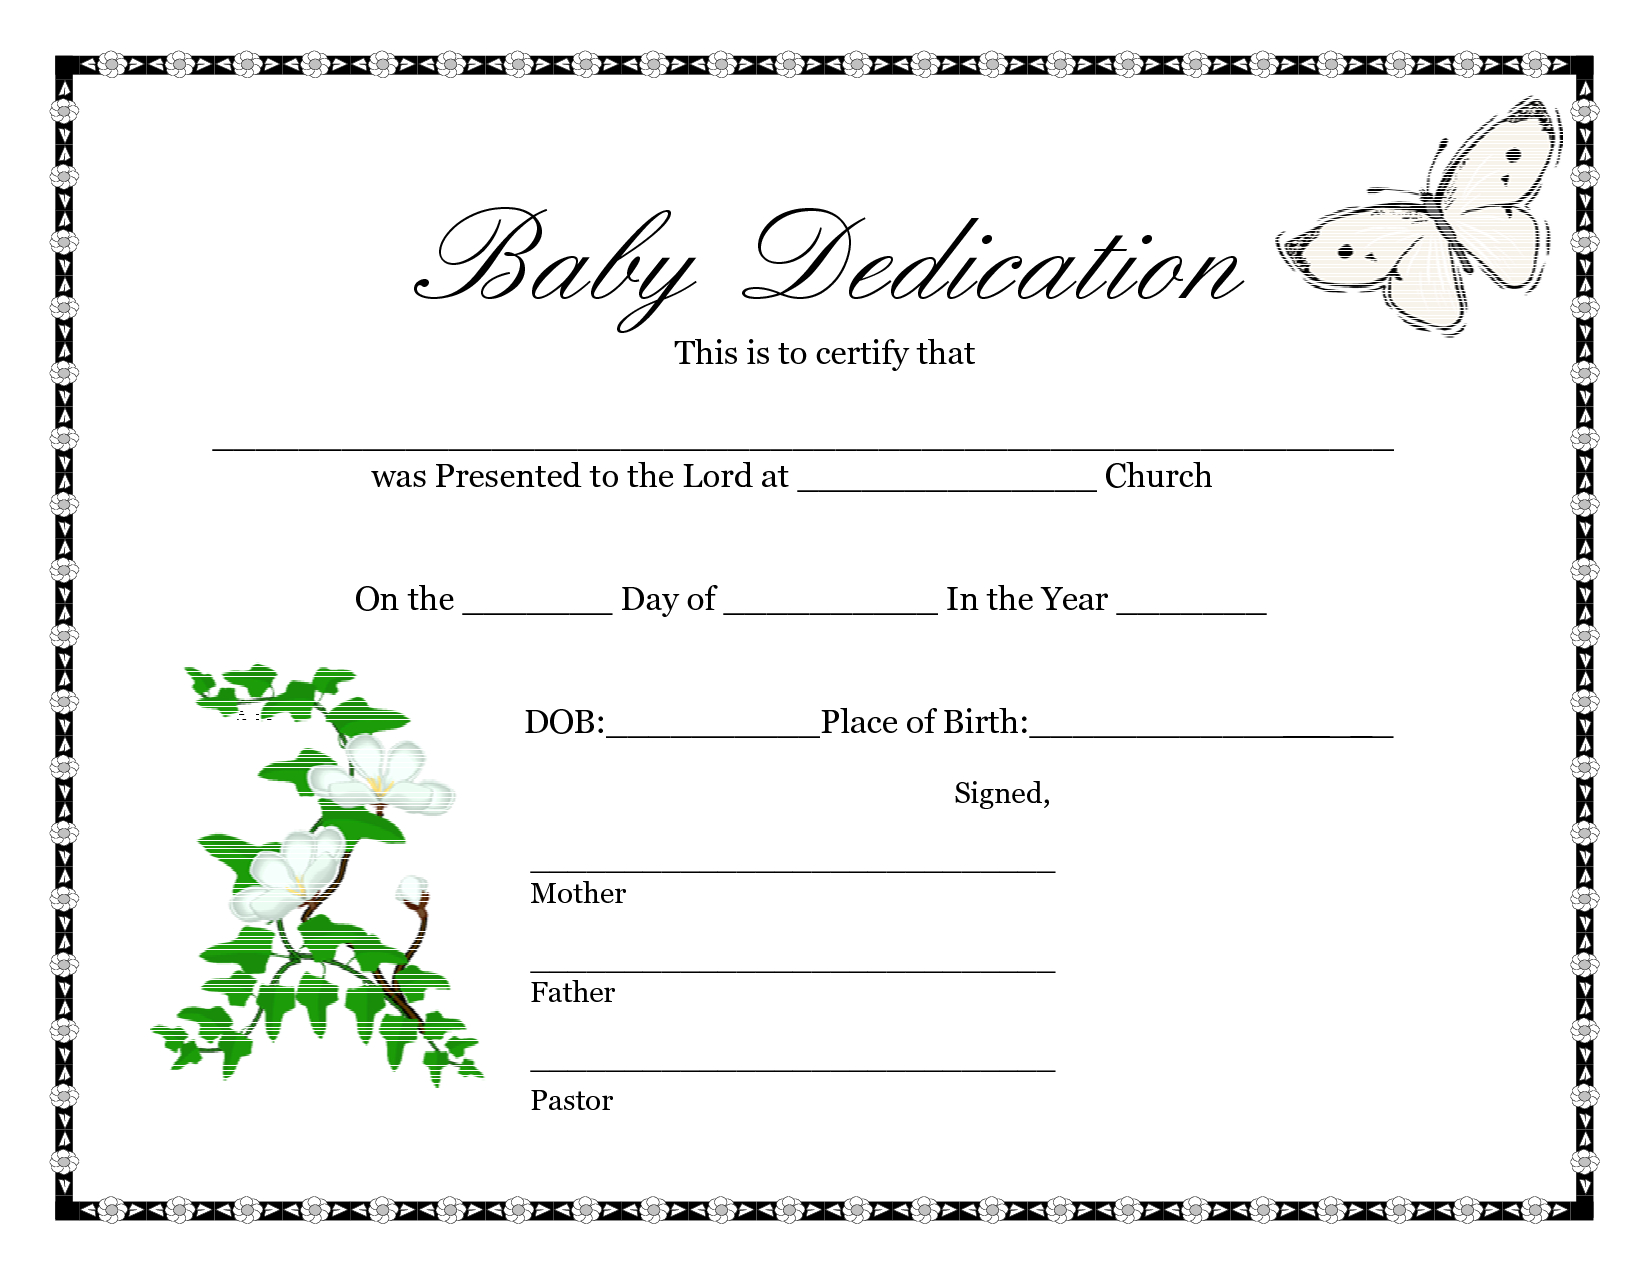 Downloadable Blank Birth Certificate Template Sample : V M D Within Birth Certificate Templates For Word